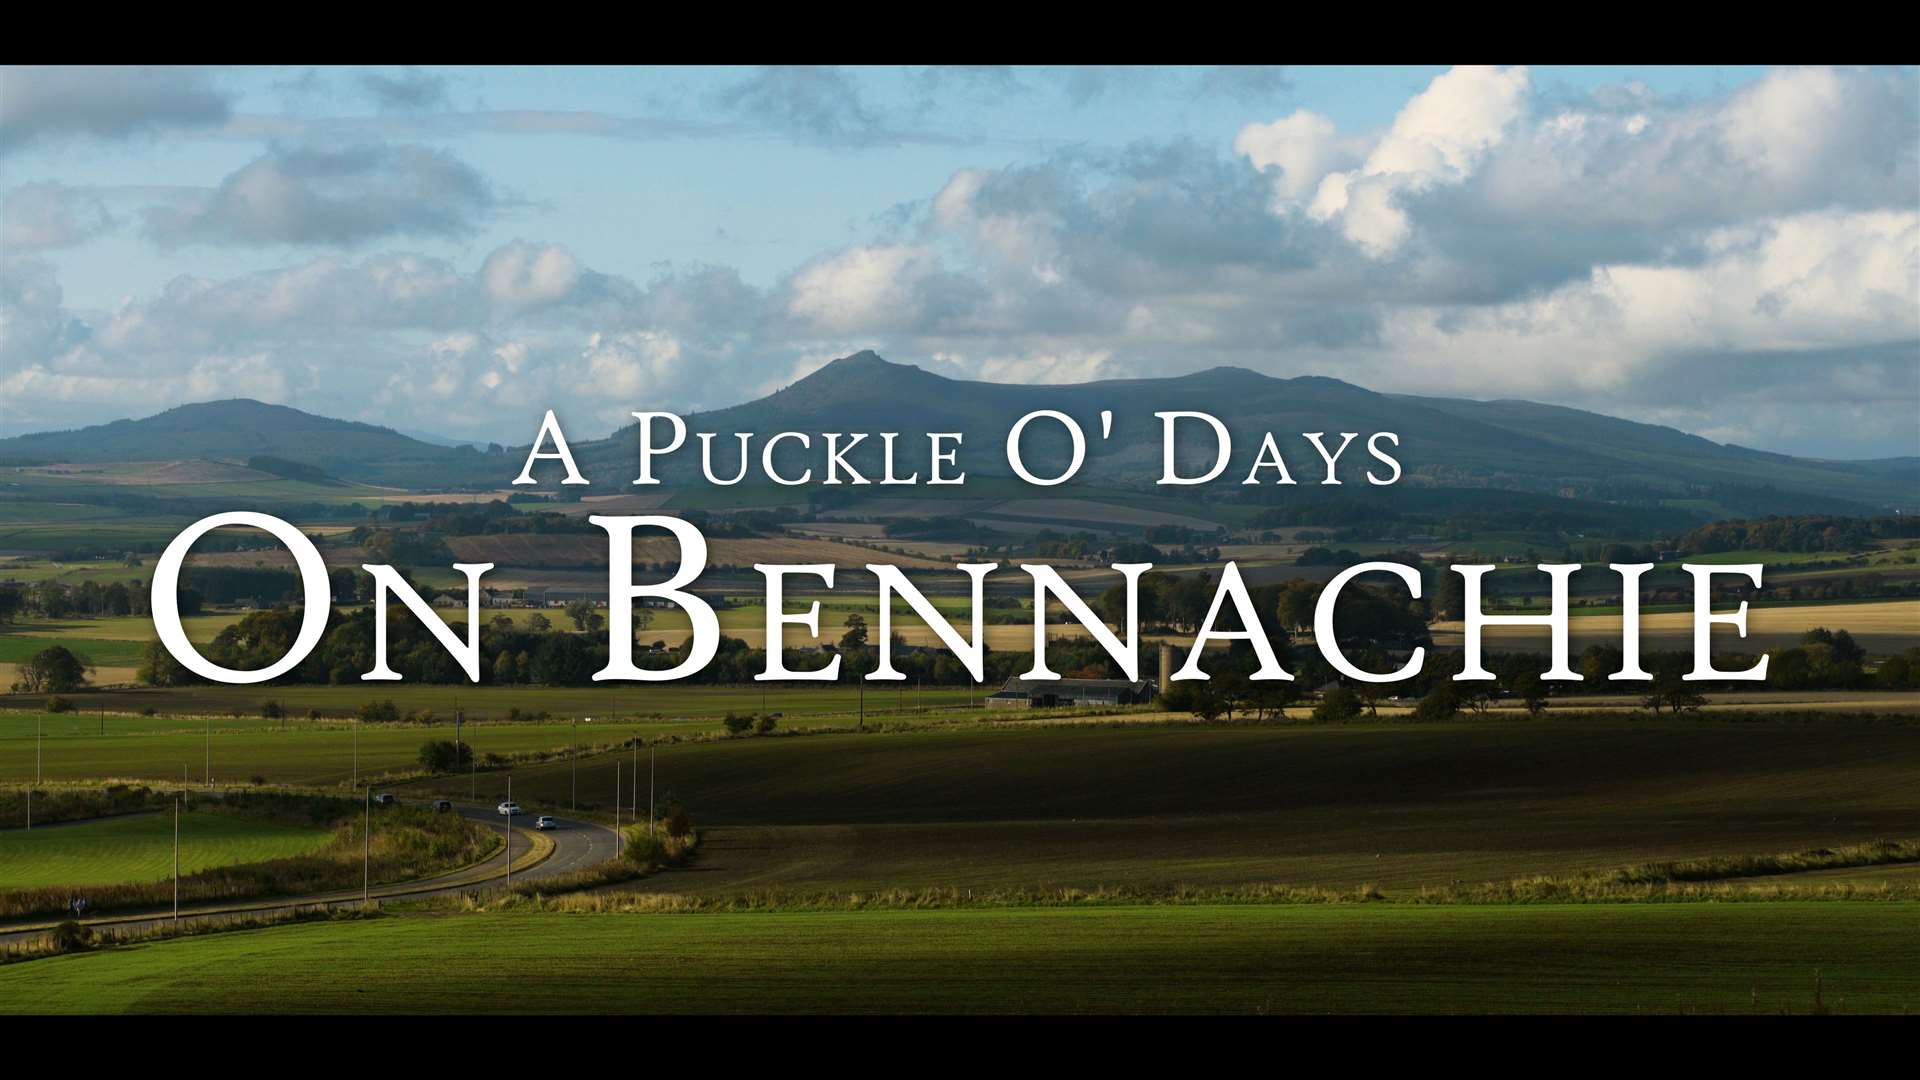 The film captures various aspects of life on Bennachie.